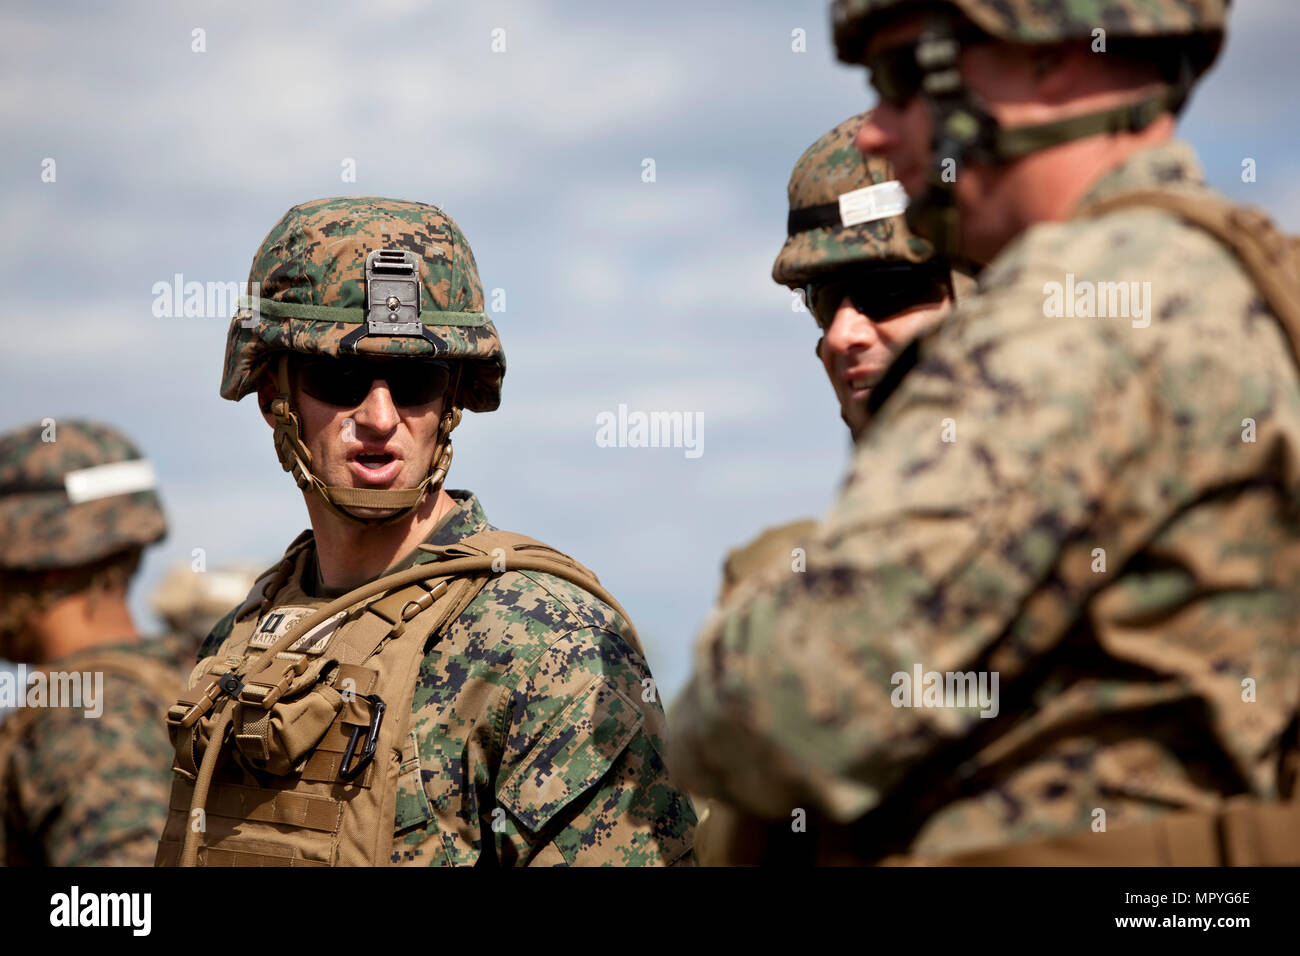 U.S. Marine Corps Capt. Adam S. Young, left, company commander of India company, Advanced Infantry Training Battalion, School of Infantry-East (SOI-E), supervises a combined arms exercise at Camp Lejeune, N.C., April 7, 2017. The mission of SOI-E is to train entry-level and advanced level Marines in the skills required of an Infantry Marine for the operating forces. (U.S. Marine Corps photo by Lance Cpl. Jose Villalobosrocha) Stock Photo